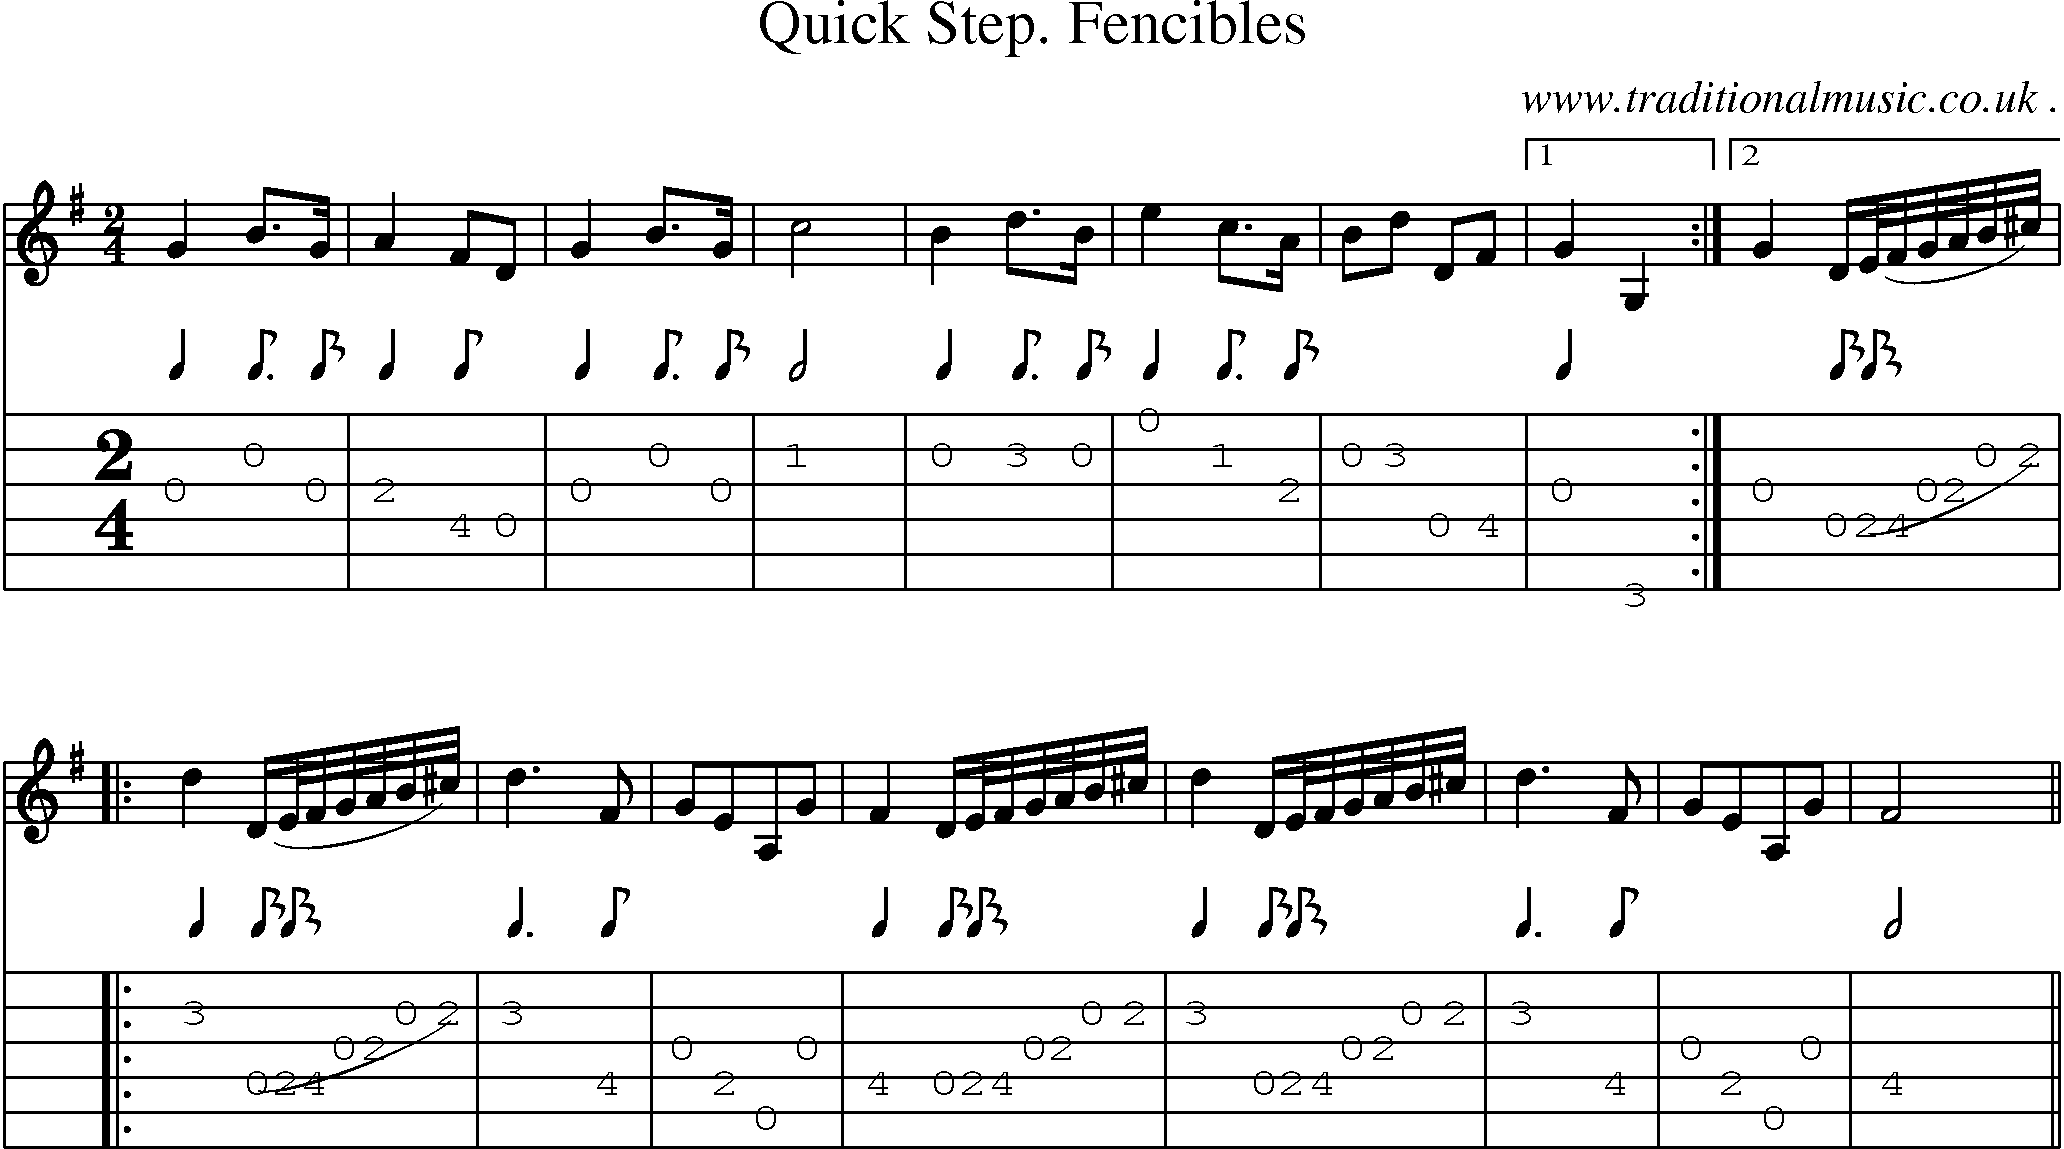 Sheet-music  score, Chords and Guitar Tabs for Quick Step Fencibles